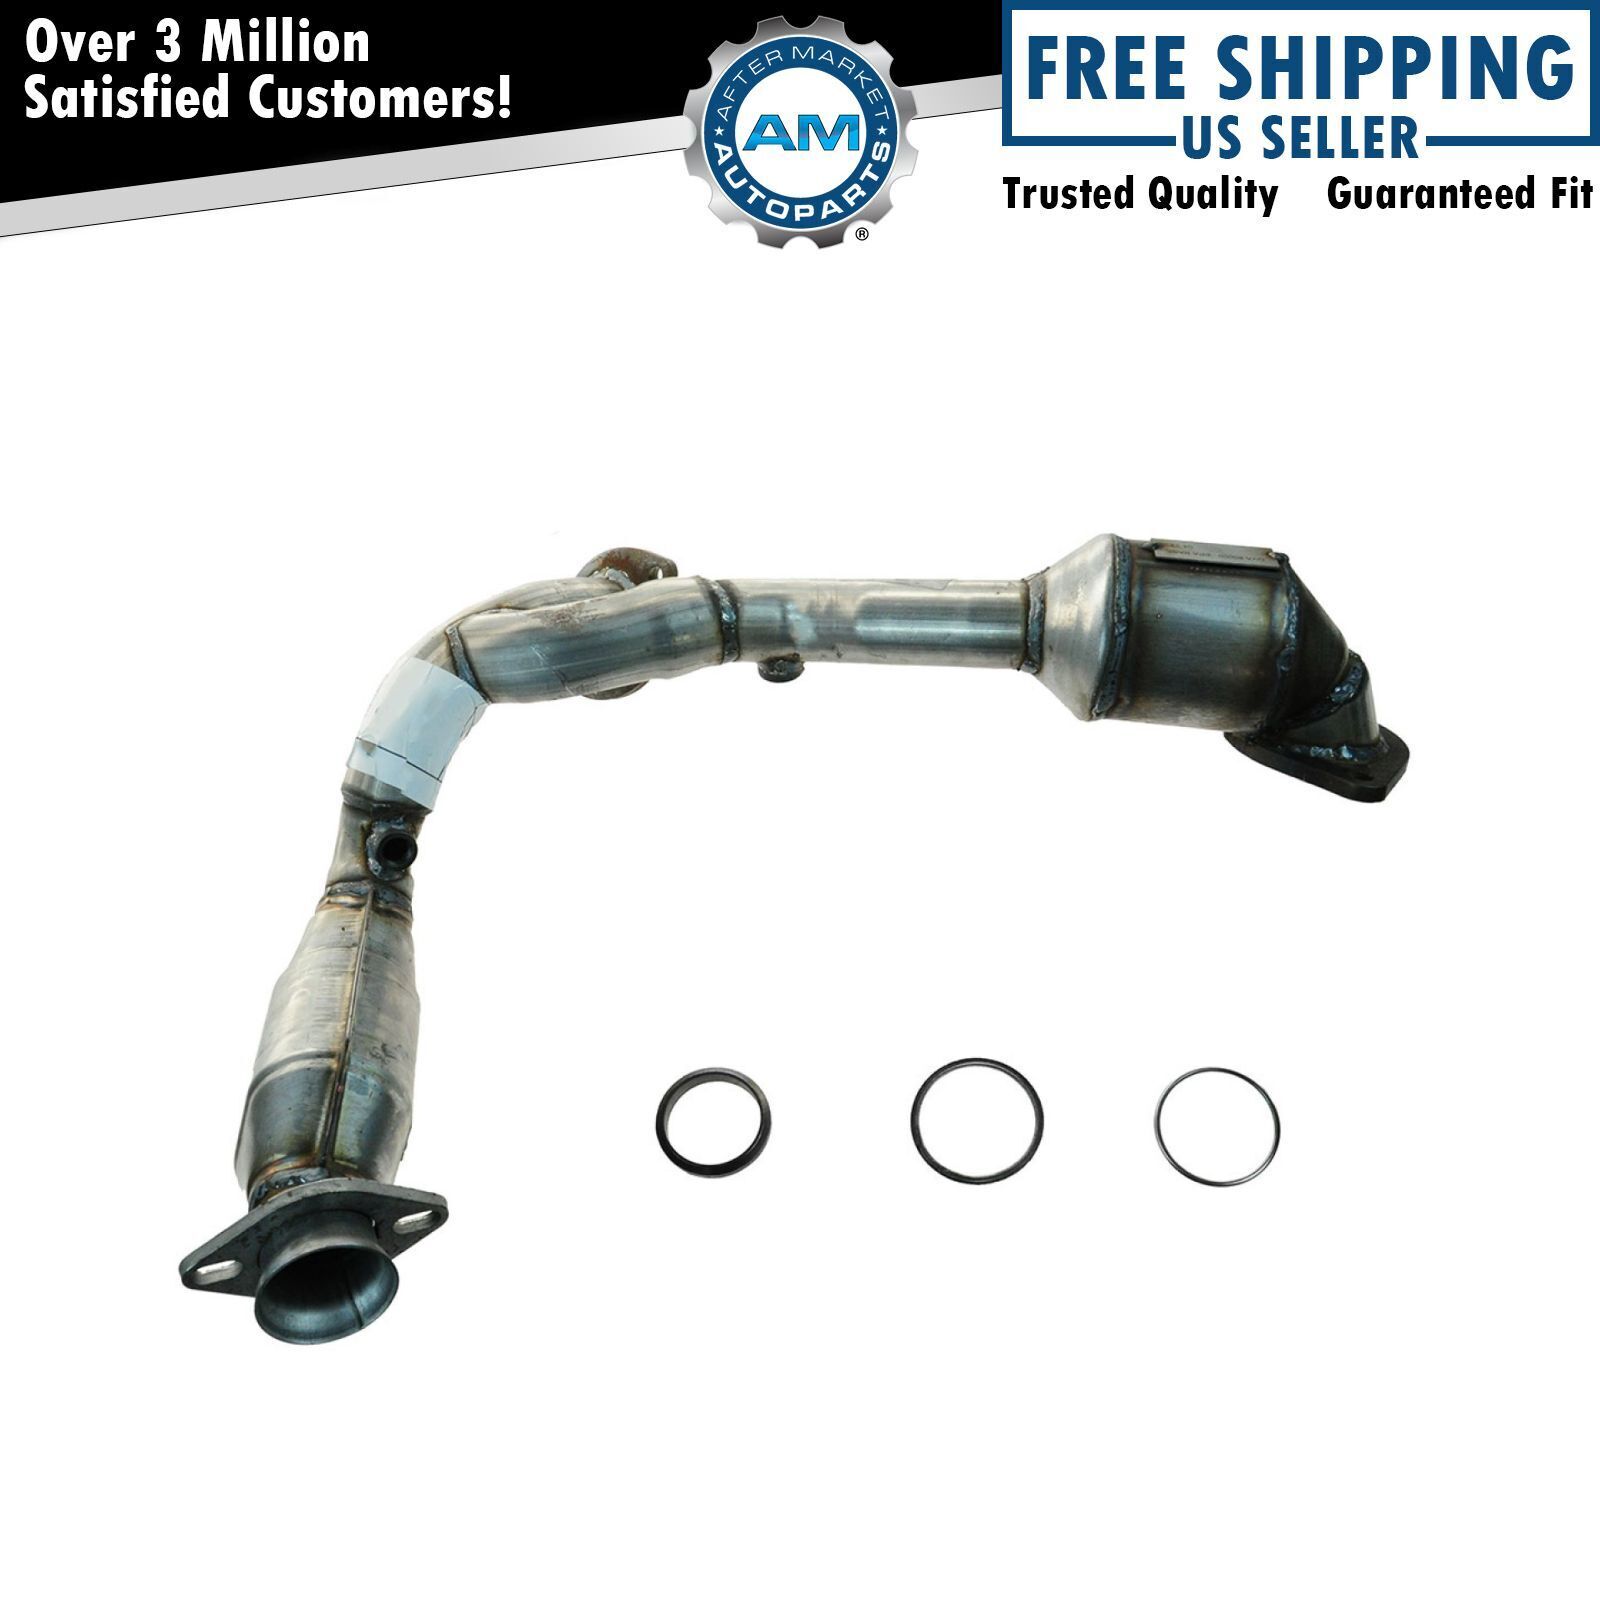 Dual Catalytic Converter Exhaust Y Pipe for Taurus Sable V6 3.0L OHV Flex